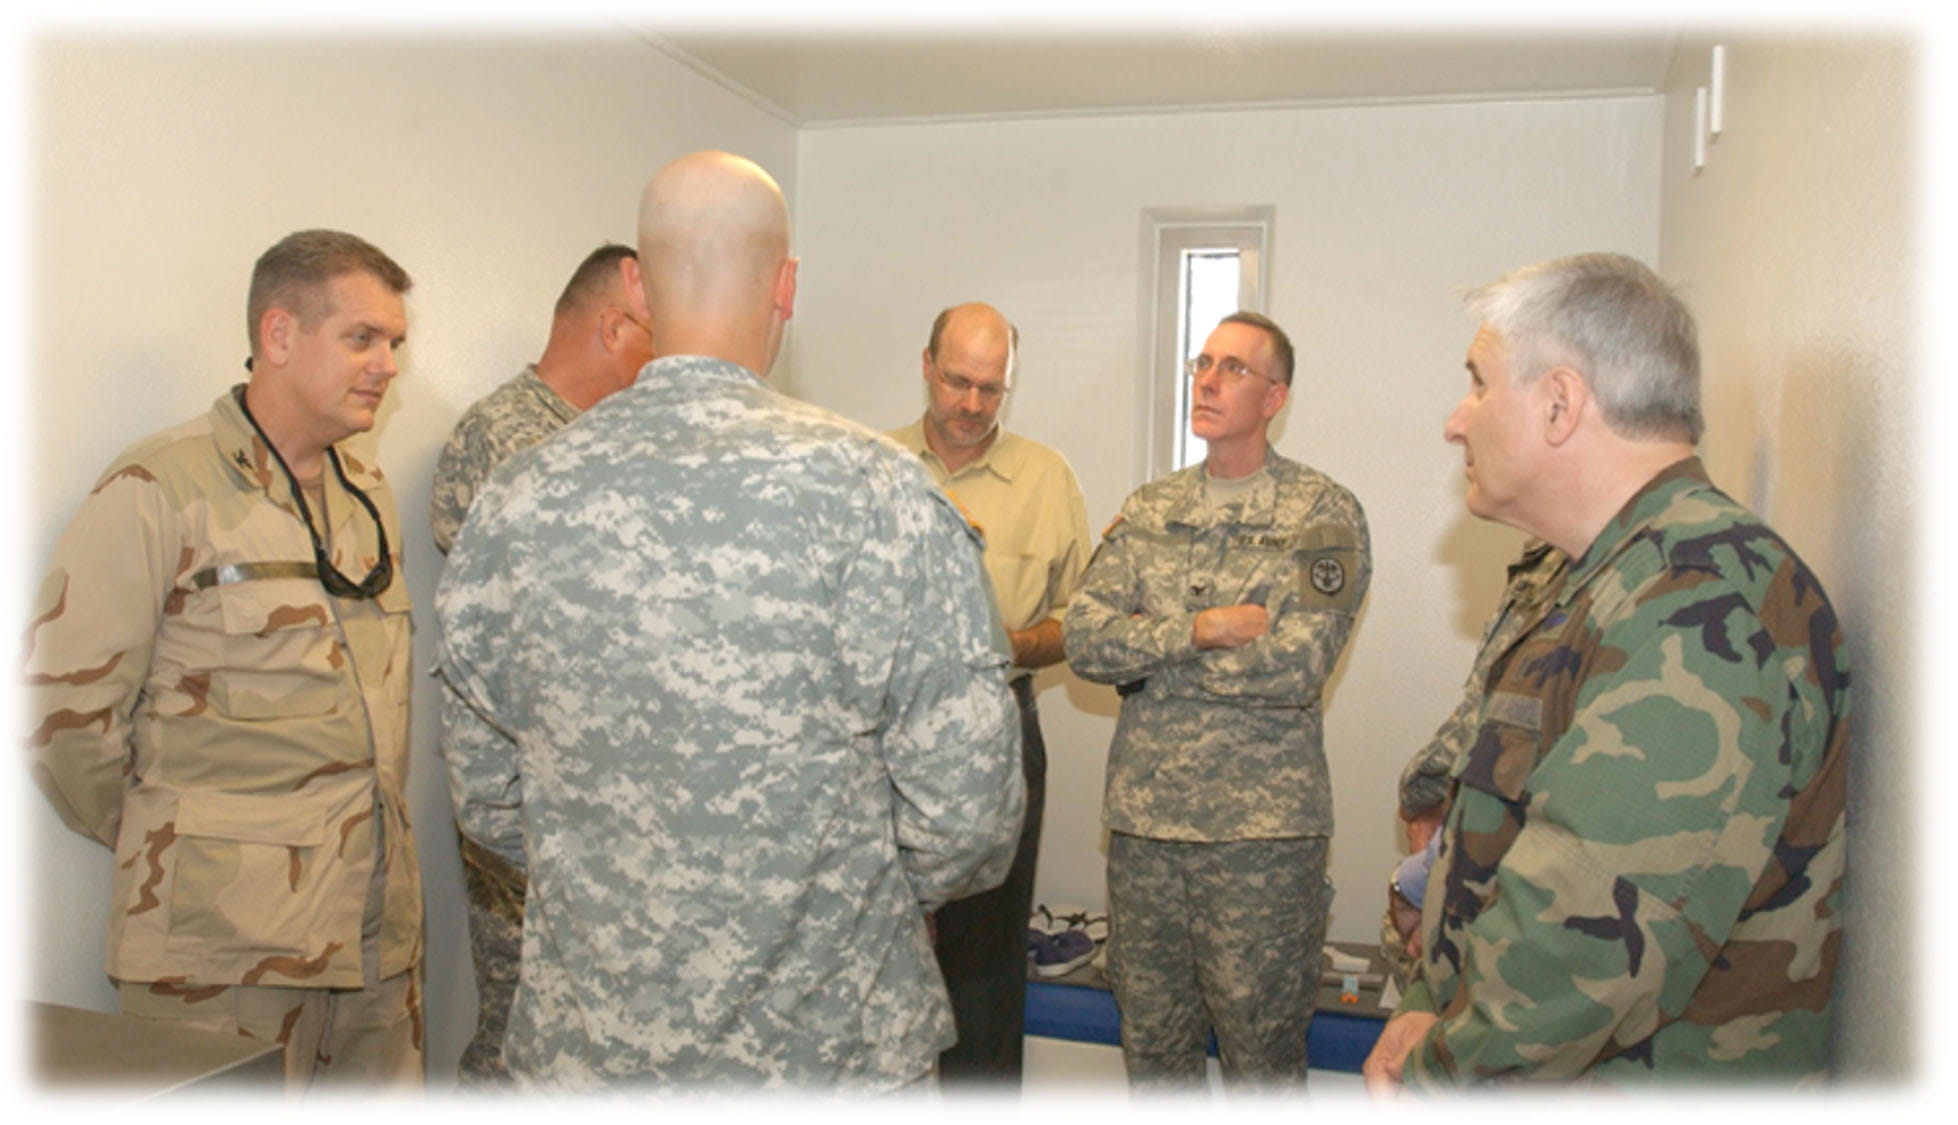 Eric Zillmer photographed visiting a detention center in Guantanamo Bay, Cuba, in 2006 with U.S. military leaders. U.S. Navy photo by: MC3 Remus Borisov; UNCLASSIFIED//Cleared For Public Release; CDR Robert T. Durand, JTF-GTMO PAO.